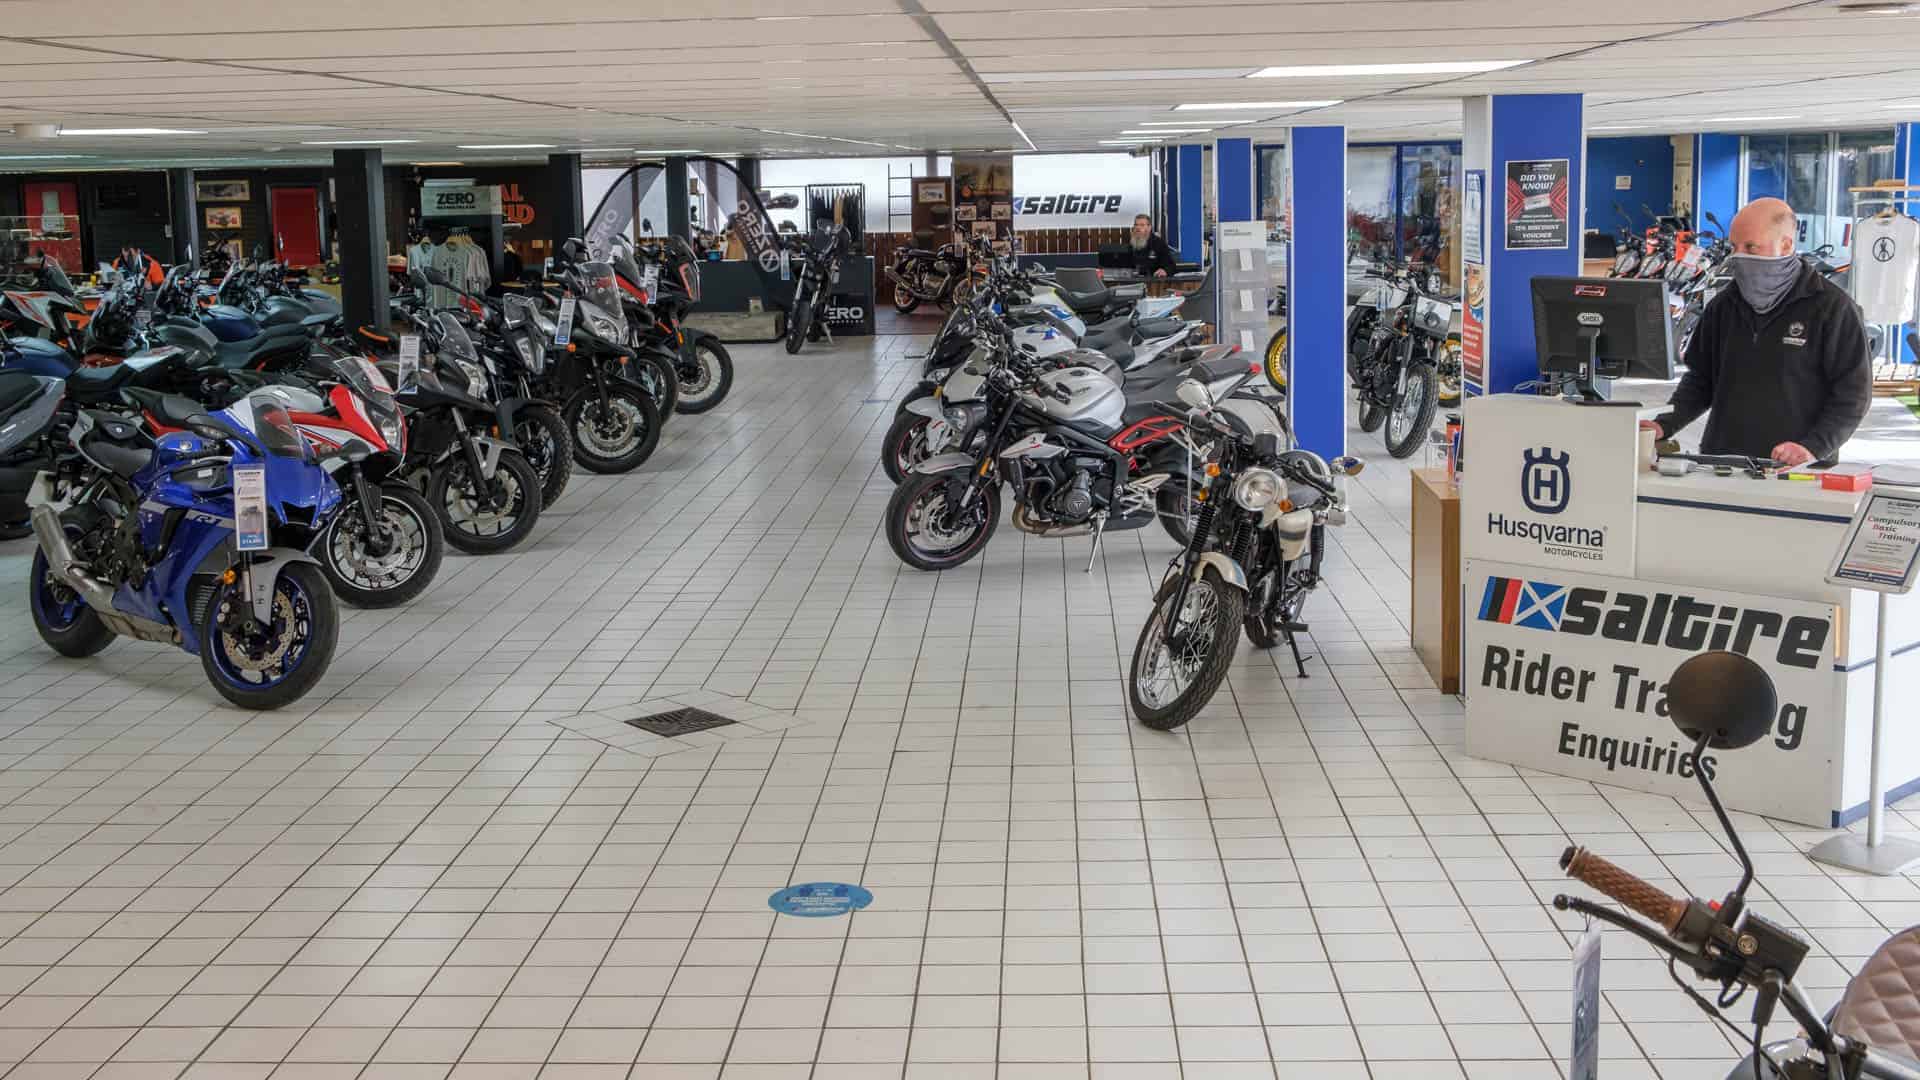 Motorcycles on display in shop